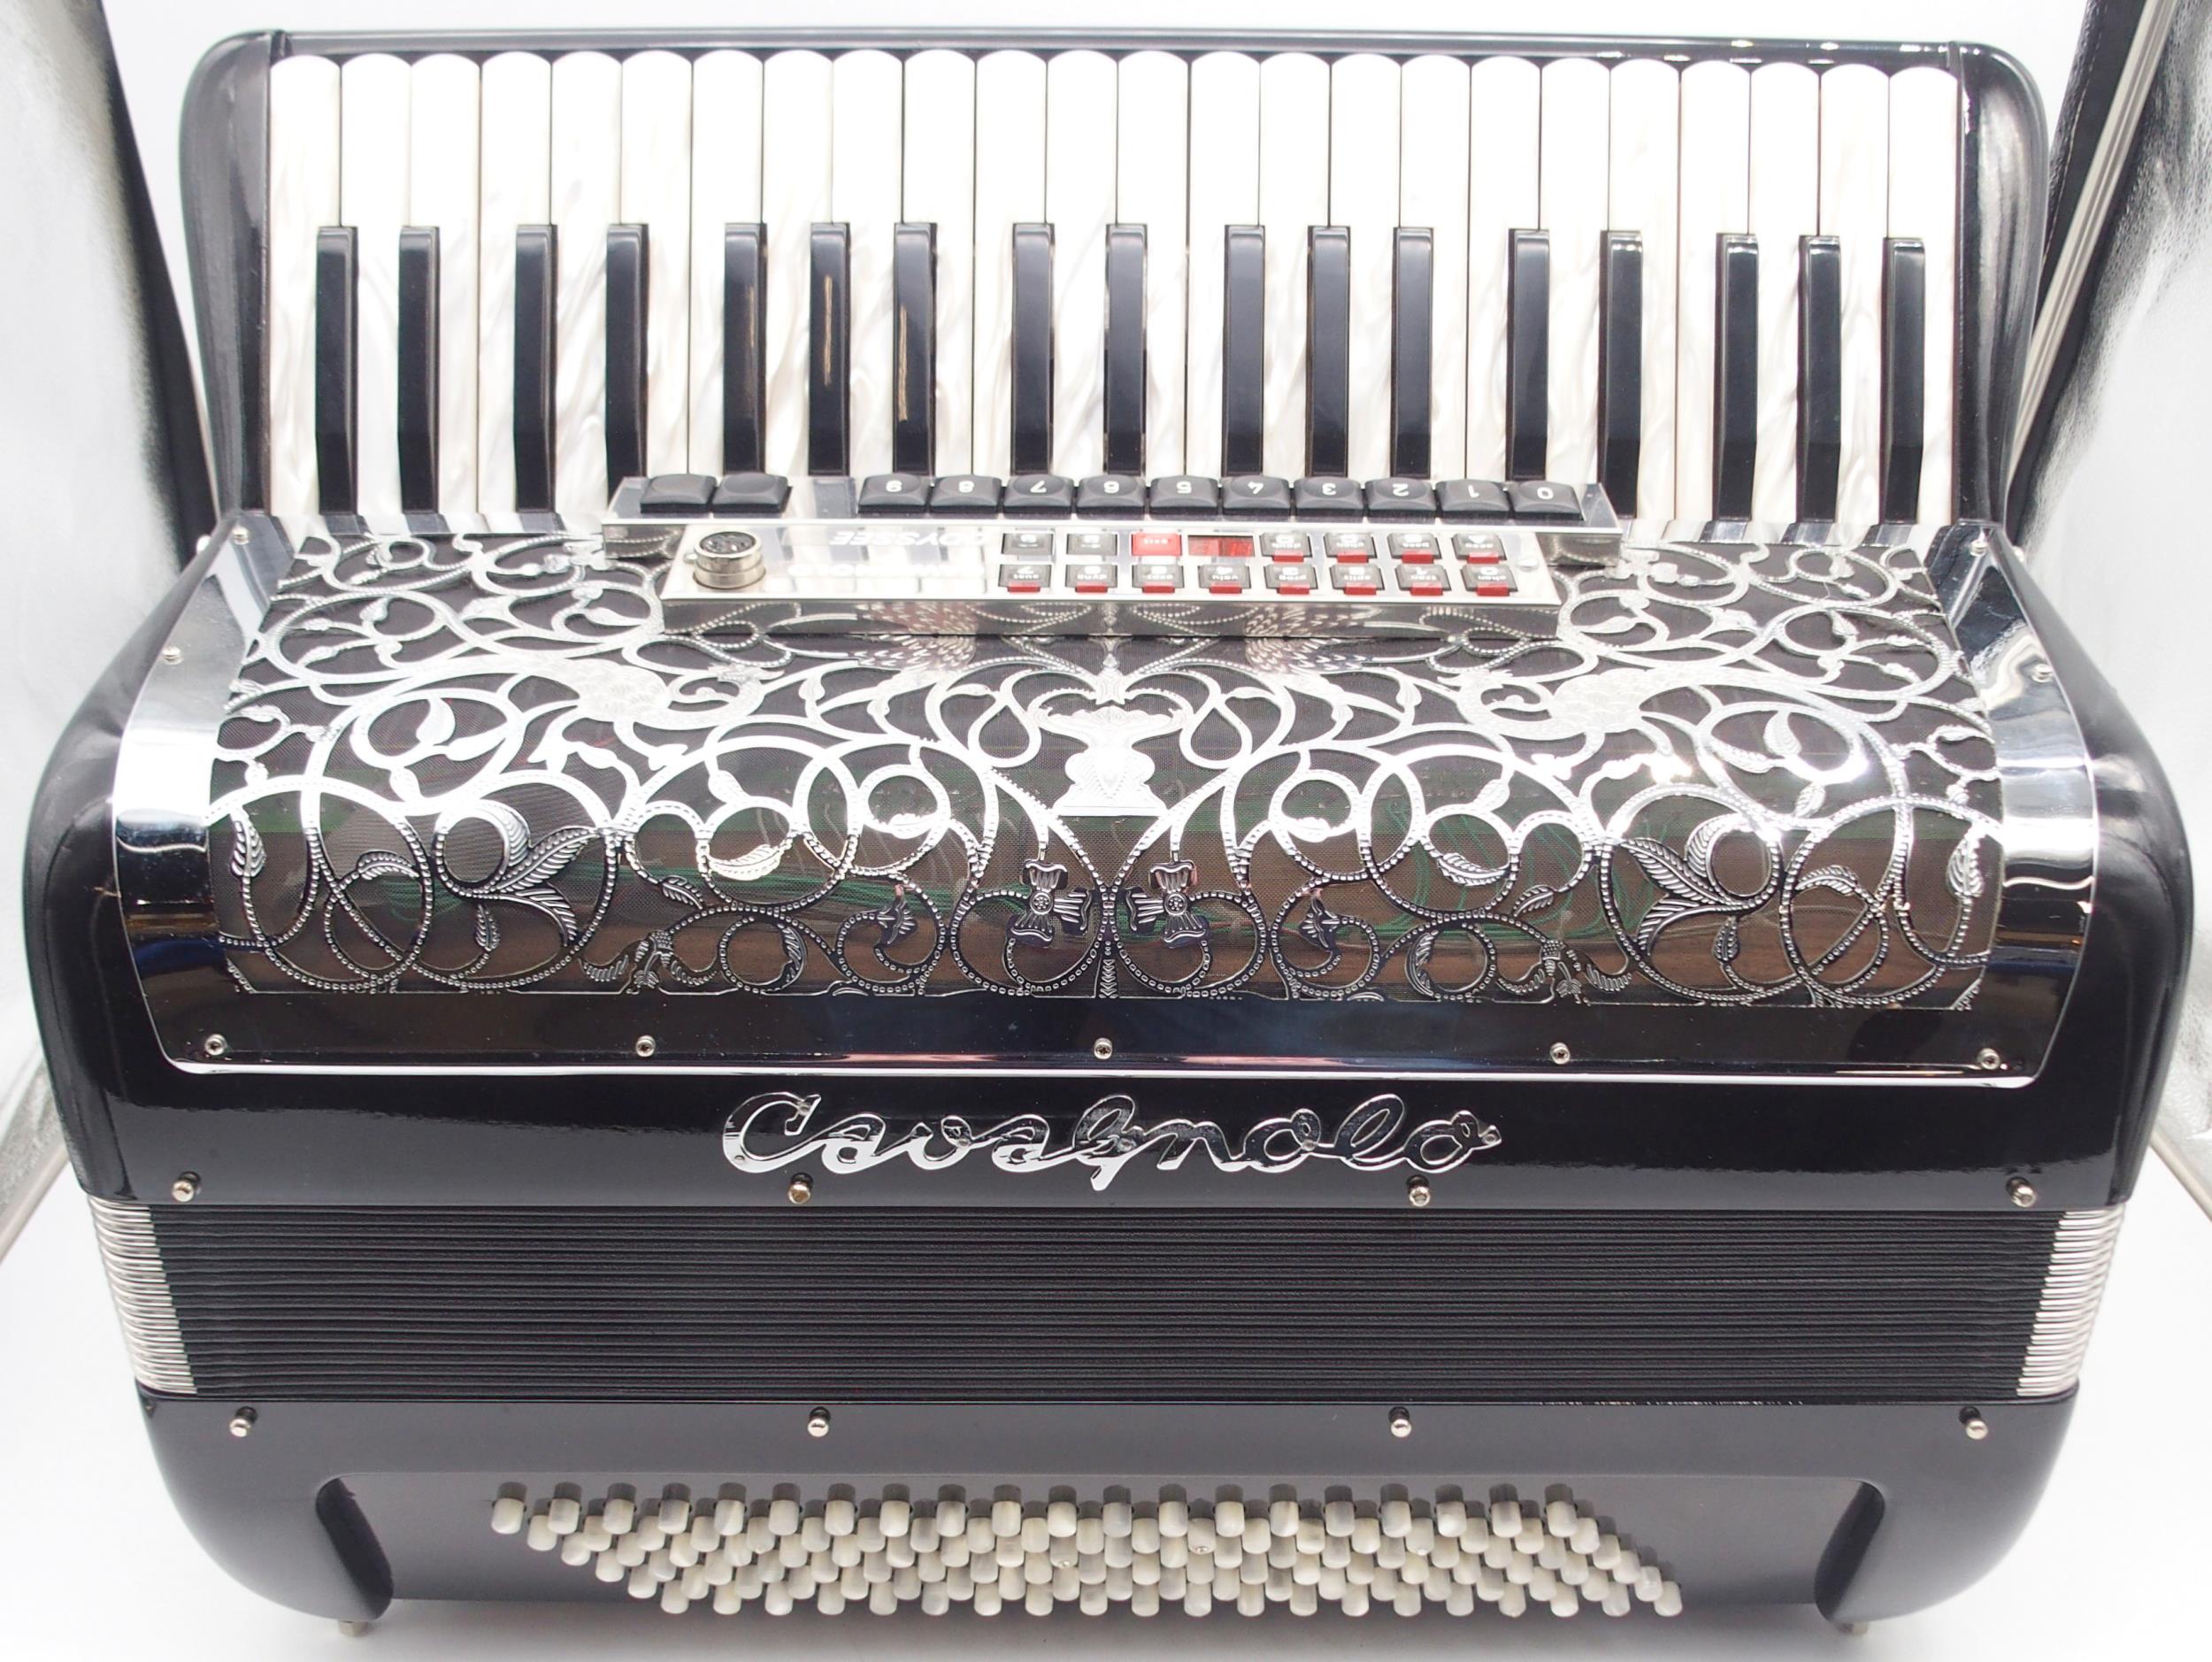 A Cavognolo Odysee reedless 120 bass 41 key piano accordion serial number 45602 together with a - Image 3 of 7